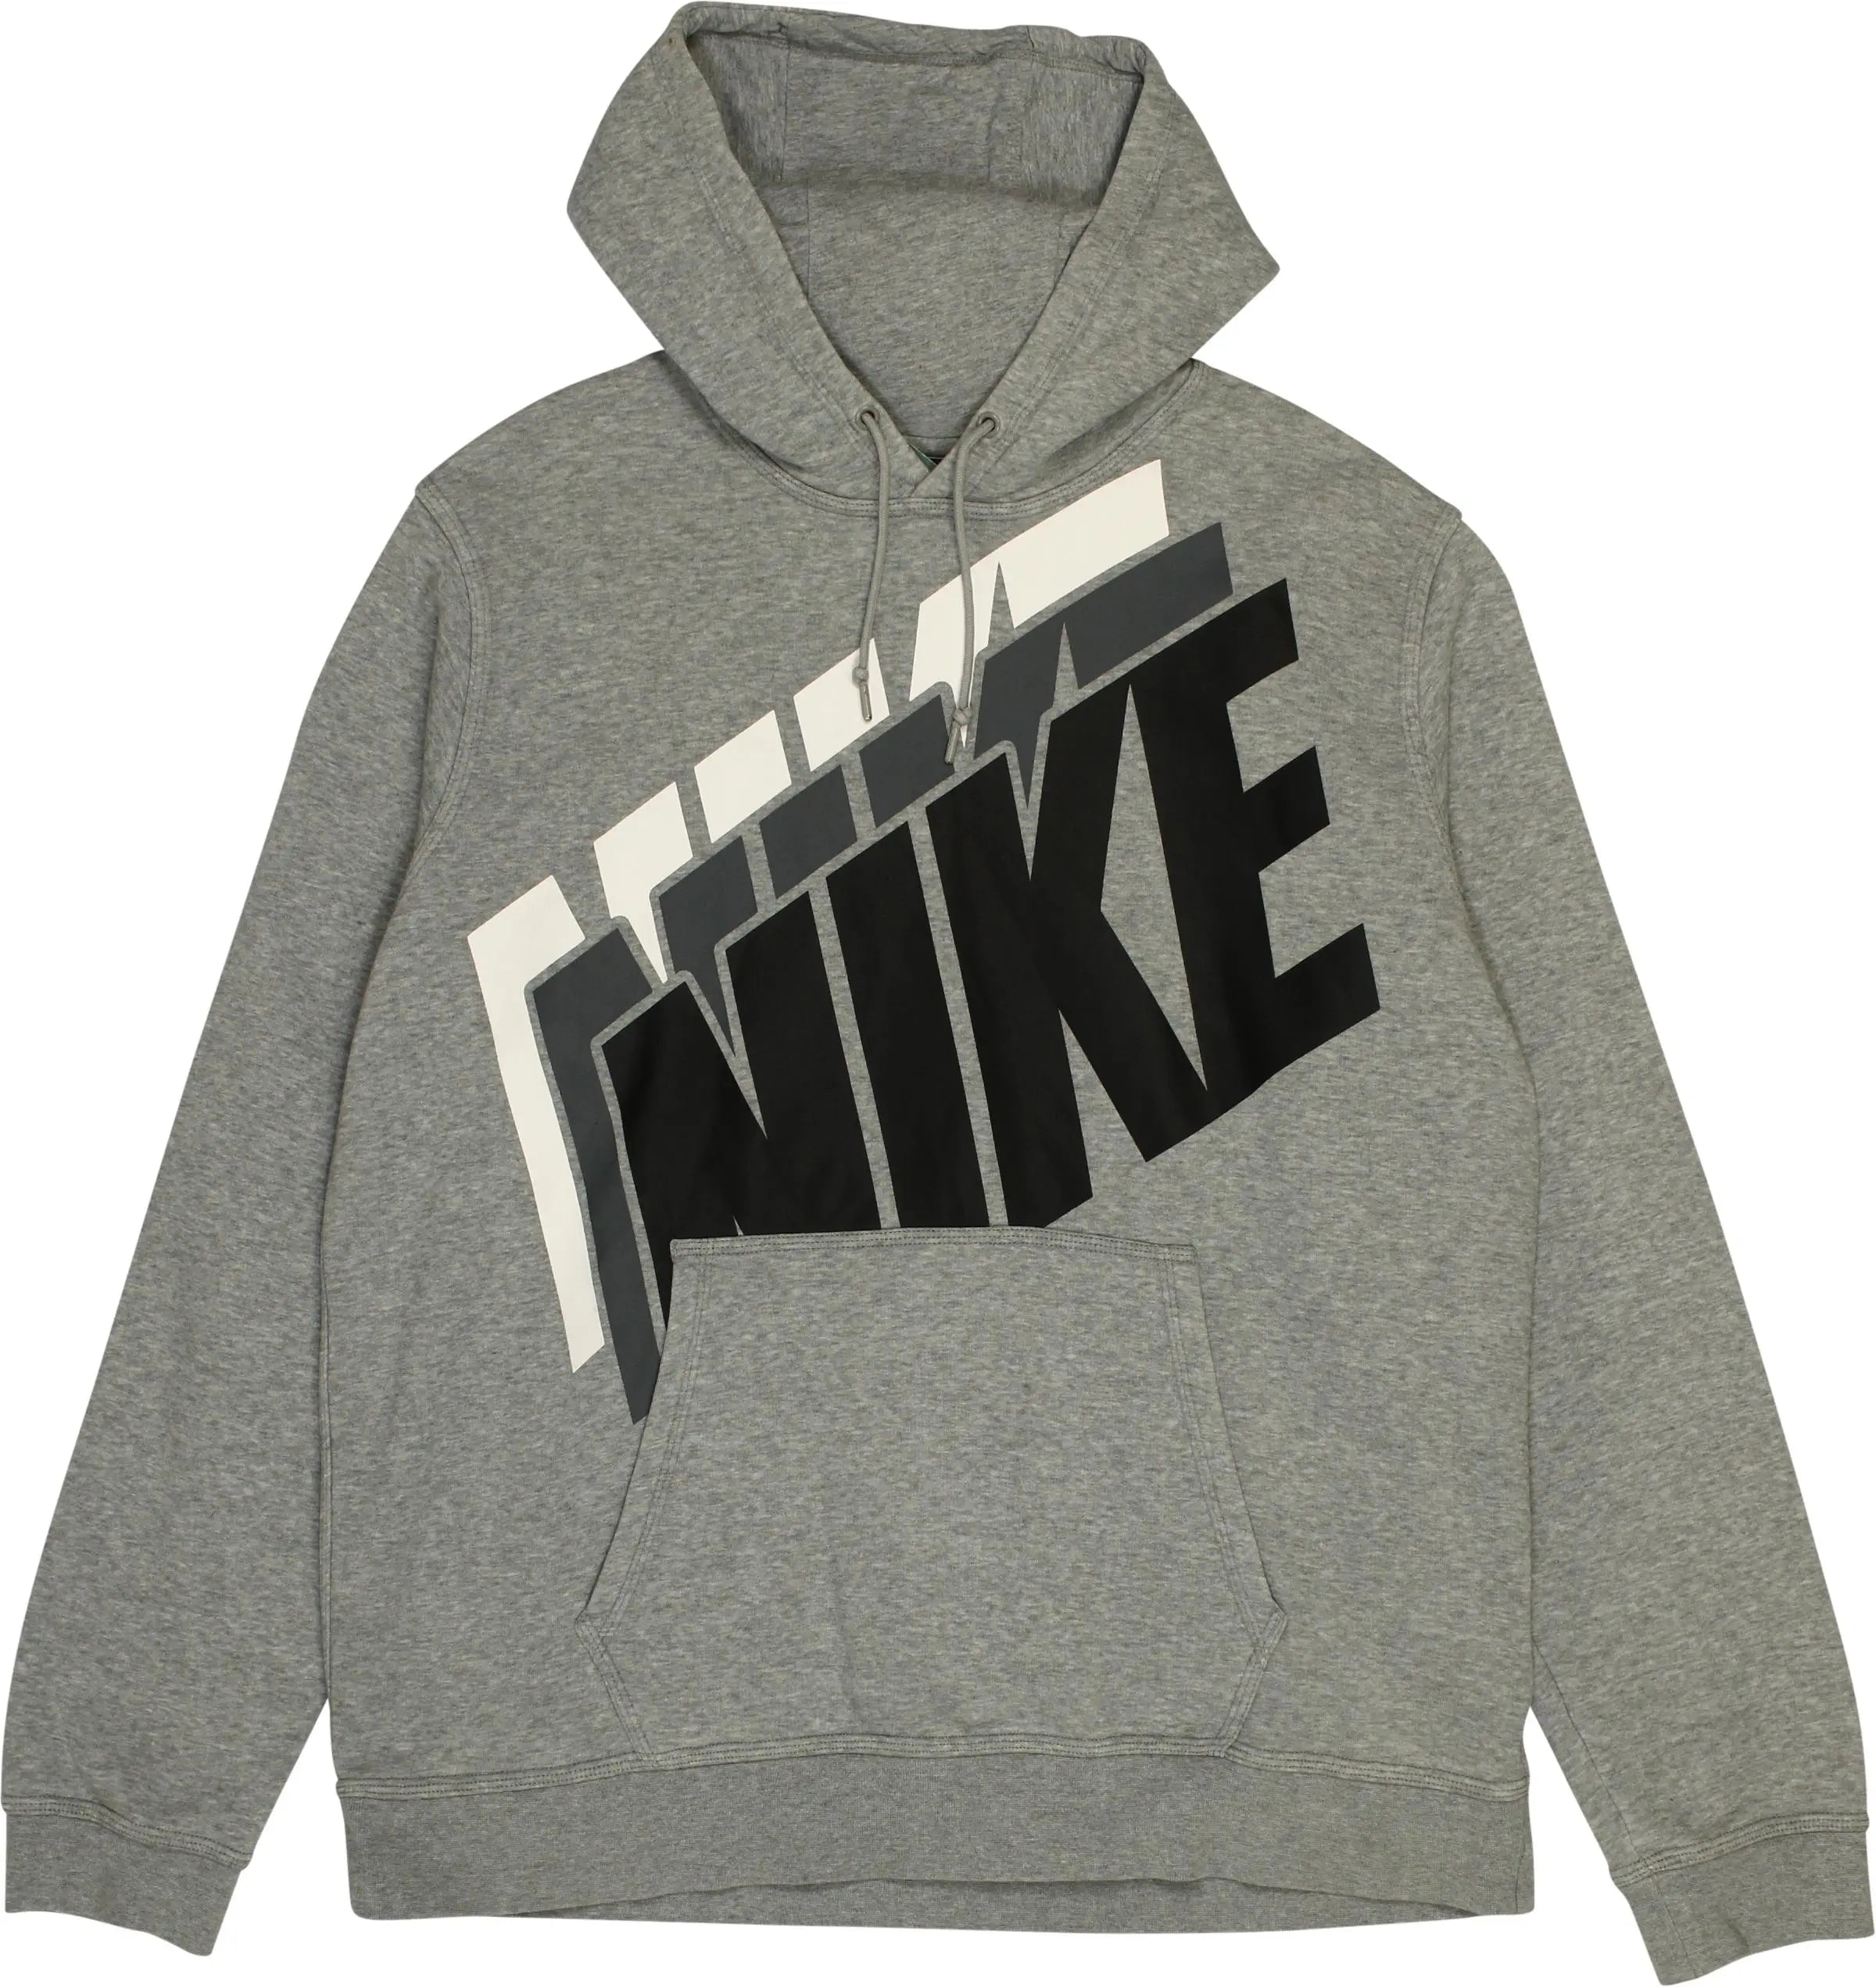 Nike - Hoodie by Nike- ThriftTale.com - Vintage and second handclothing